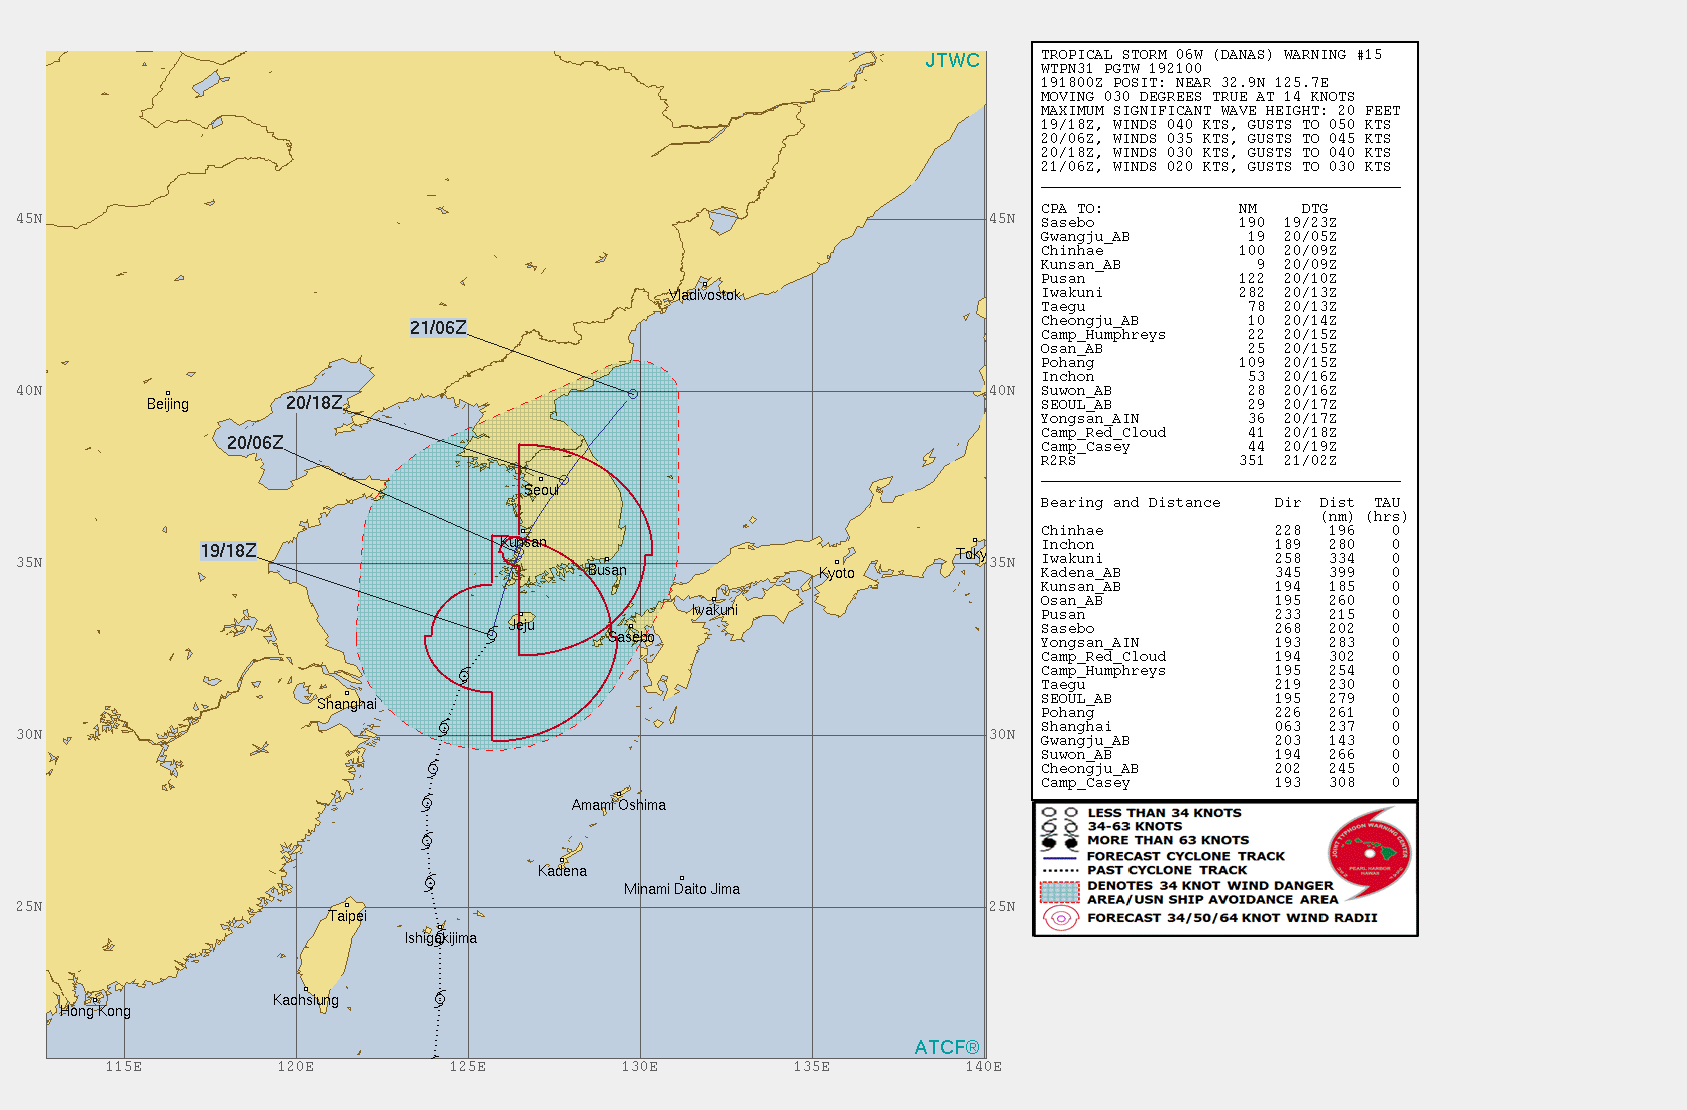 WARNING 15/JTWC. INTENSITY FORECAST TO FALL BELOW 35KNOTS AFTER 12HOURS.